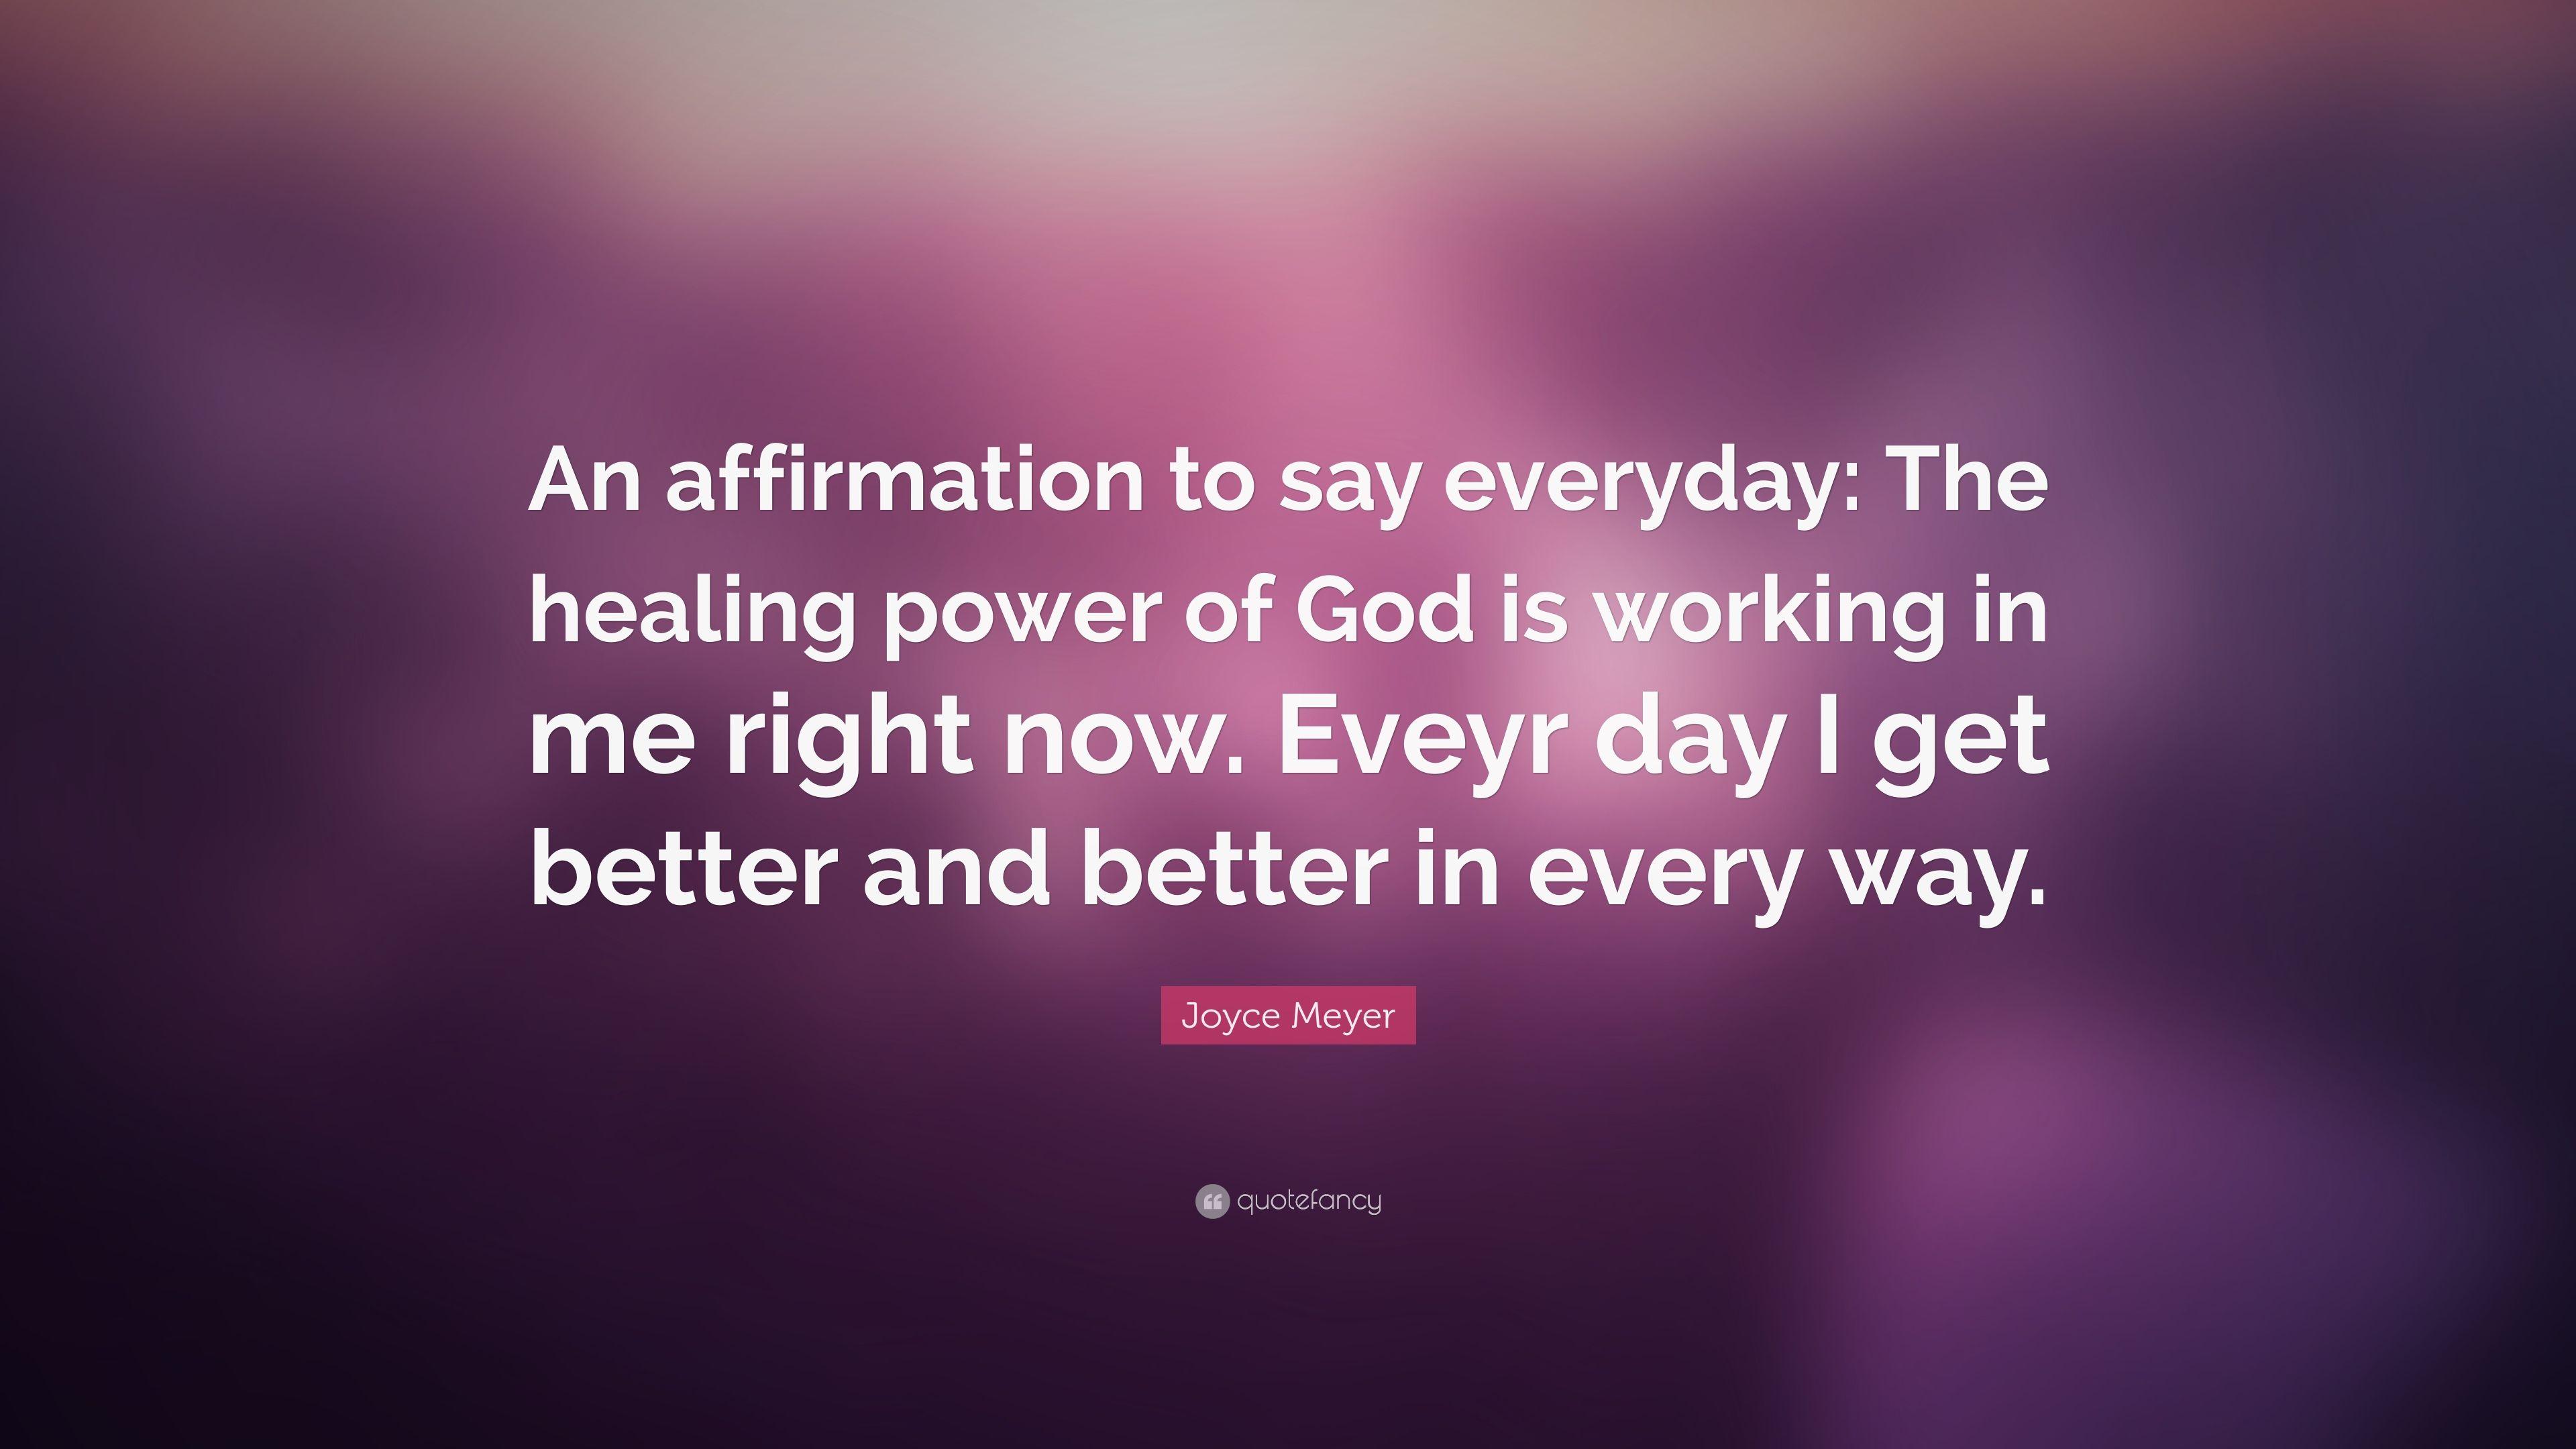 Joyce Meyer Quote: “An affirmation to say everyday: The healing